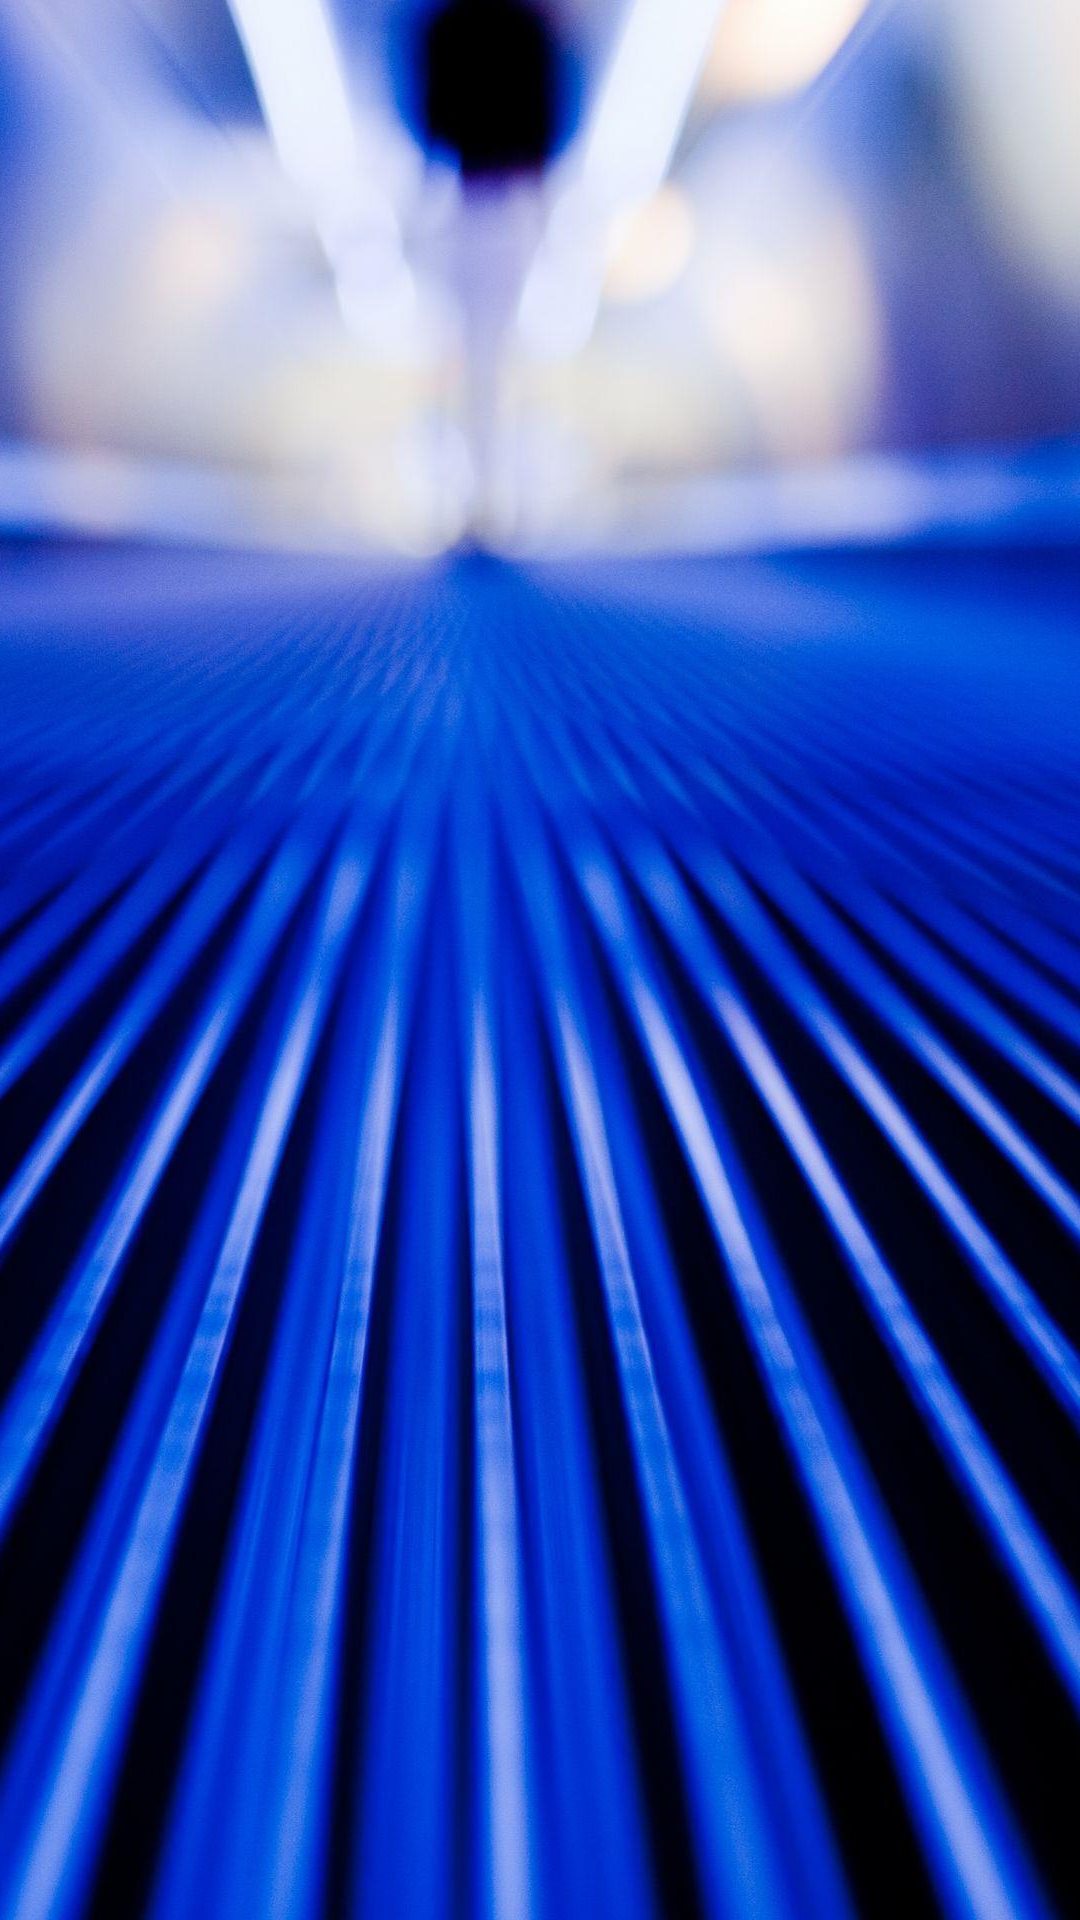 Moving Walkway Blue Stripes Close Up Iphone 6 Plus - Hd Wallpaper Iphone 6s Lights , HD Wallpaper & Backgrounds